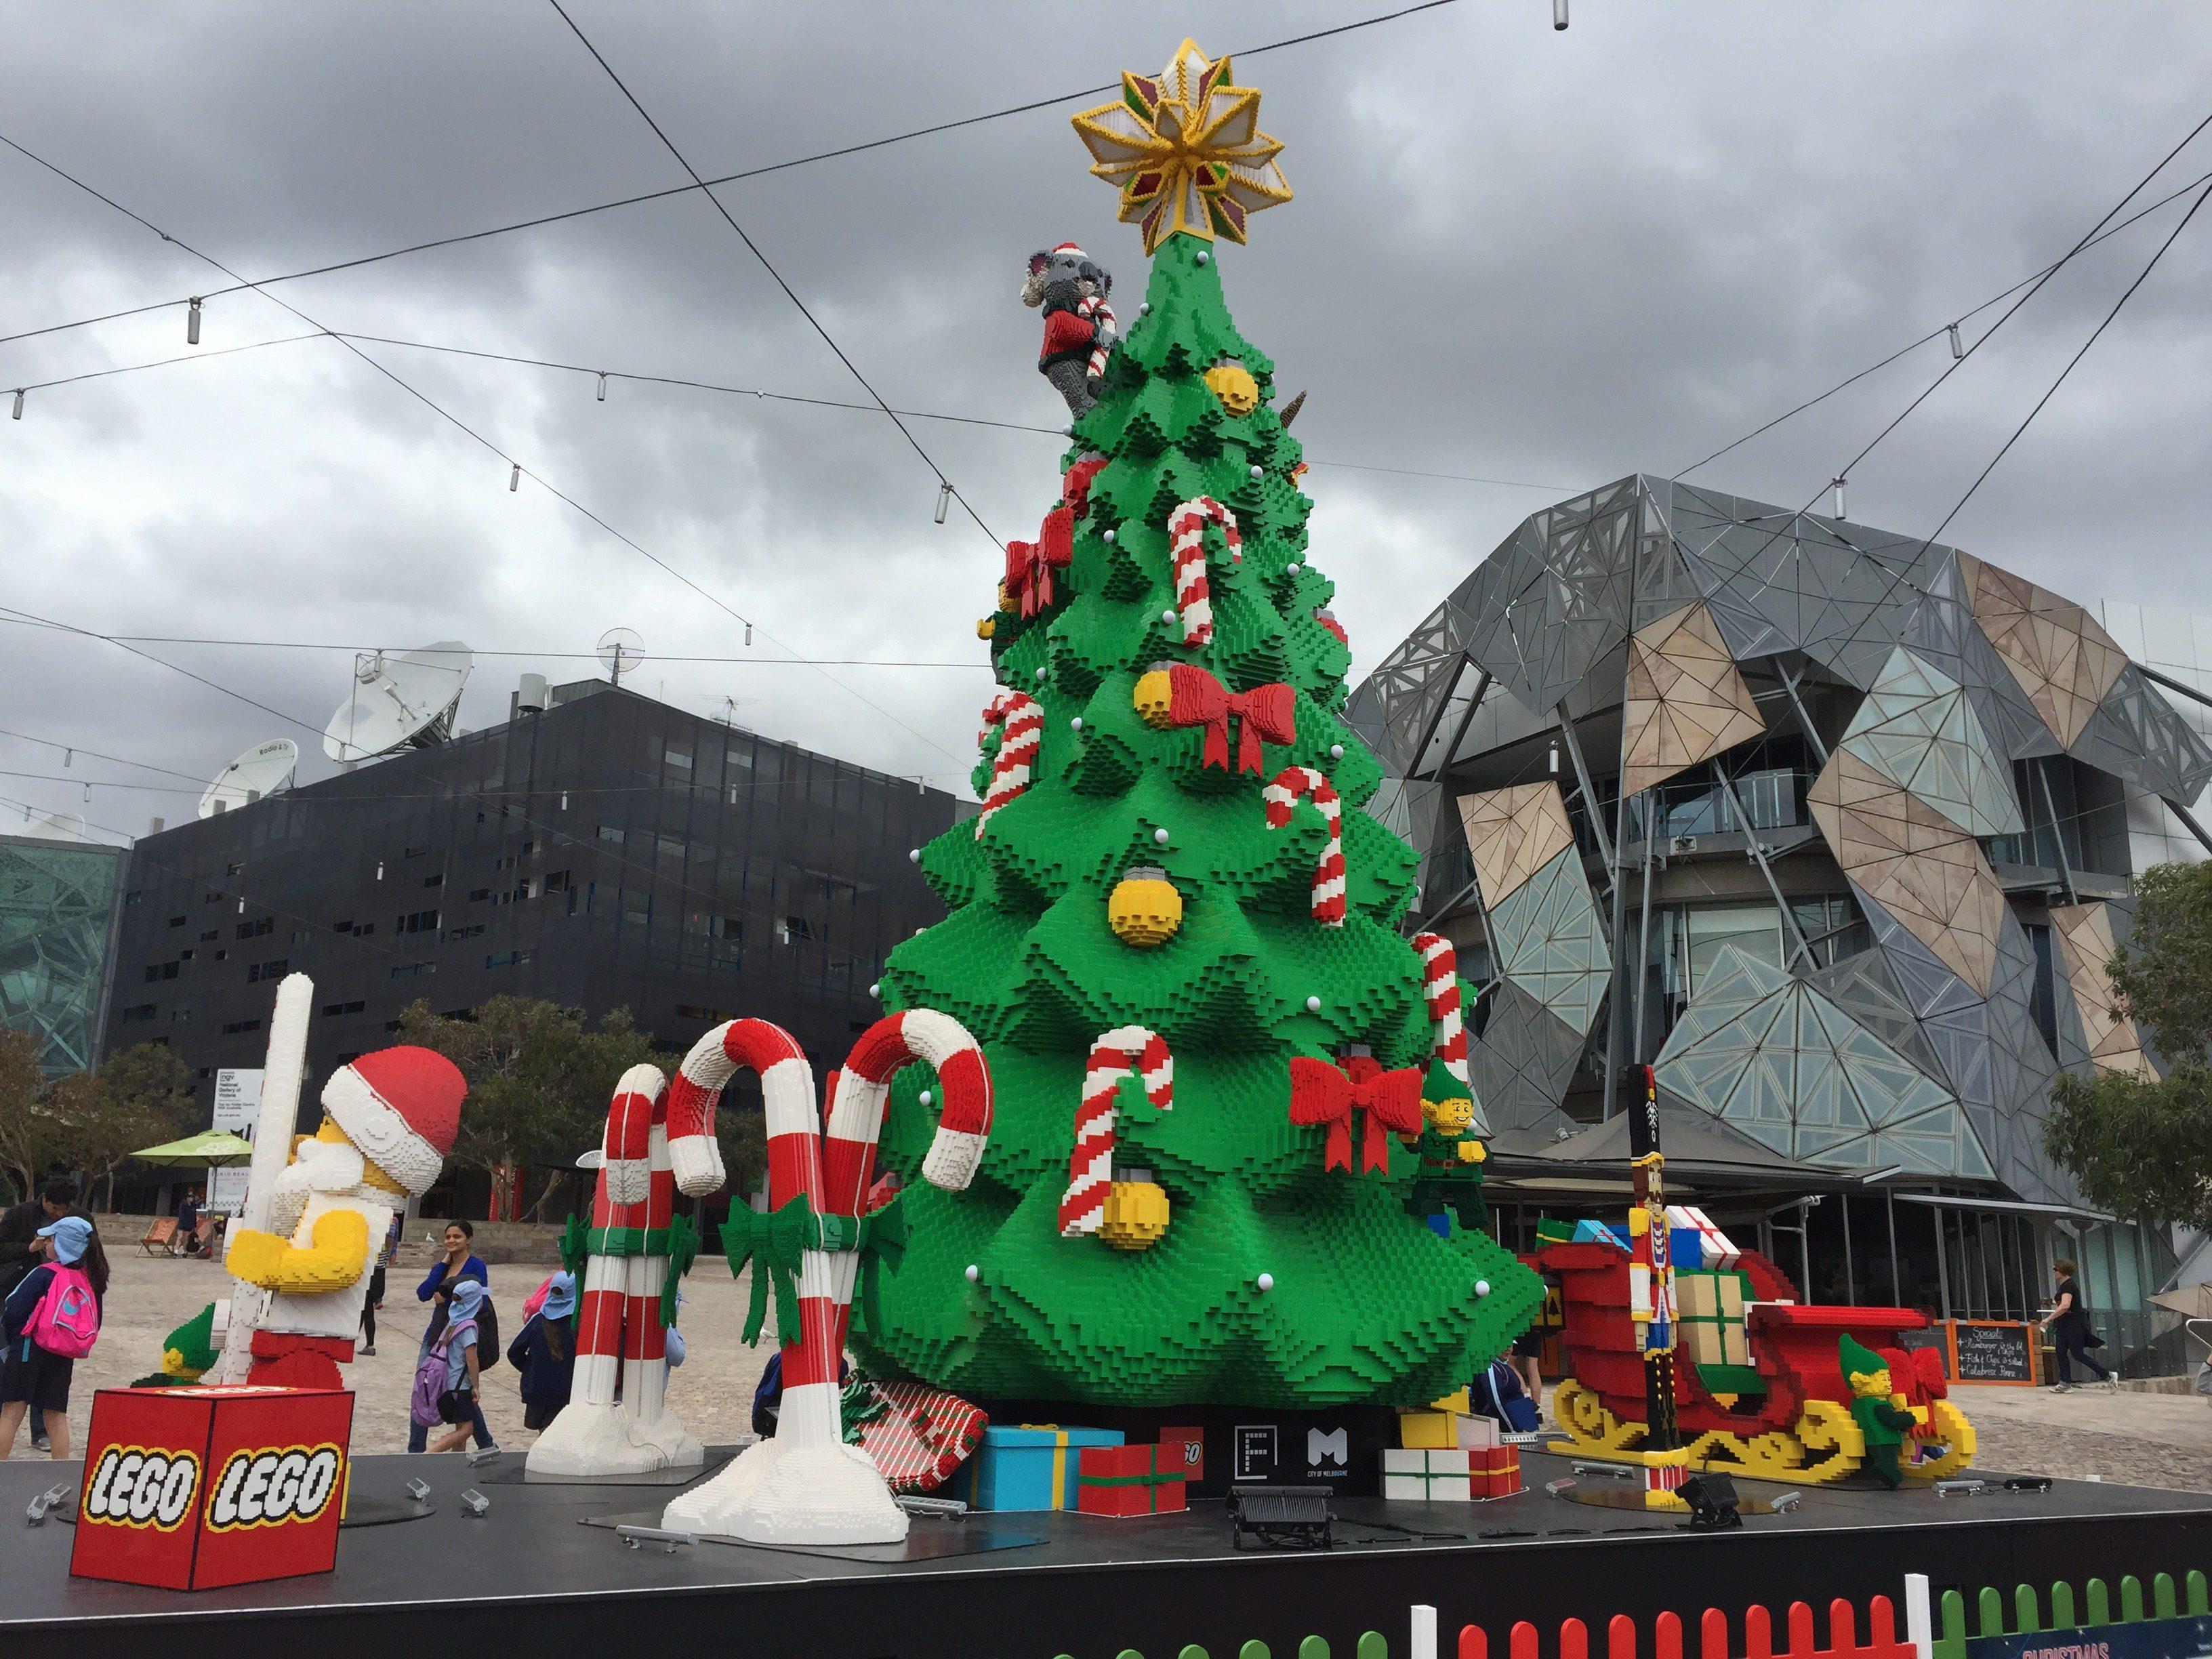 Lego Christmas Tree in Melbourne